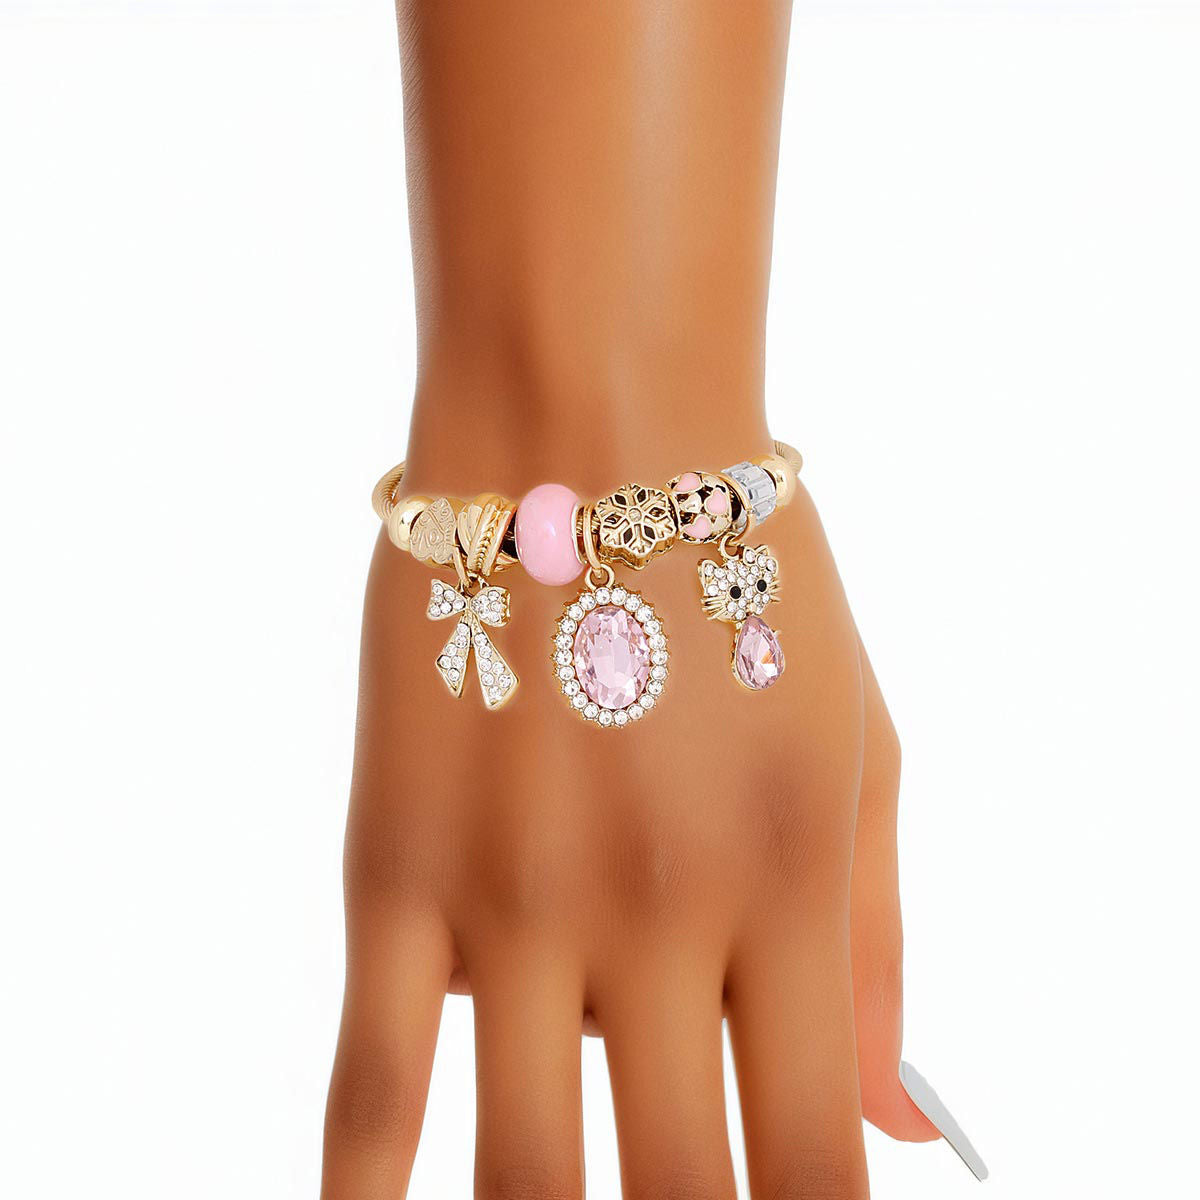 Cable Bangle Pink Kitty Gold Bracelet for Women